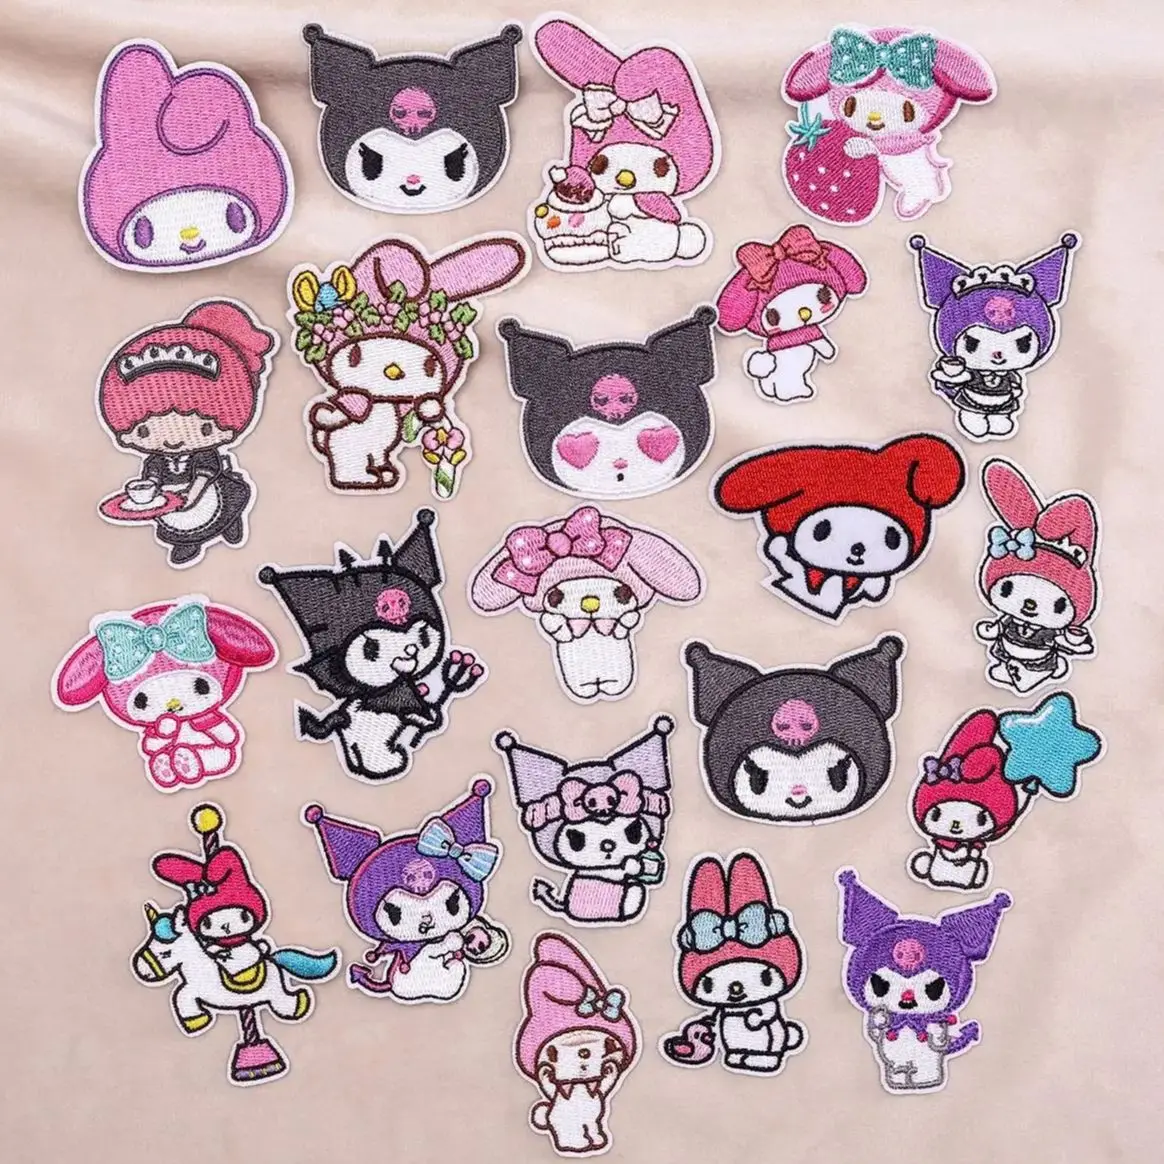 

22Pcs Cartoon Kuromi Anime Melody Applique For Sew Child Clothes Iron on Embroidery Patches DIY Kwaii T-shirt Coat Decor Badge